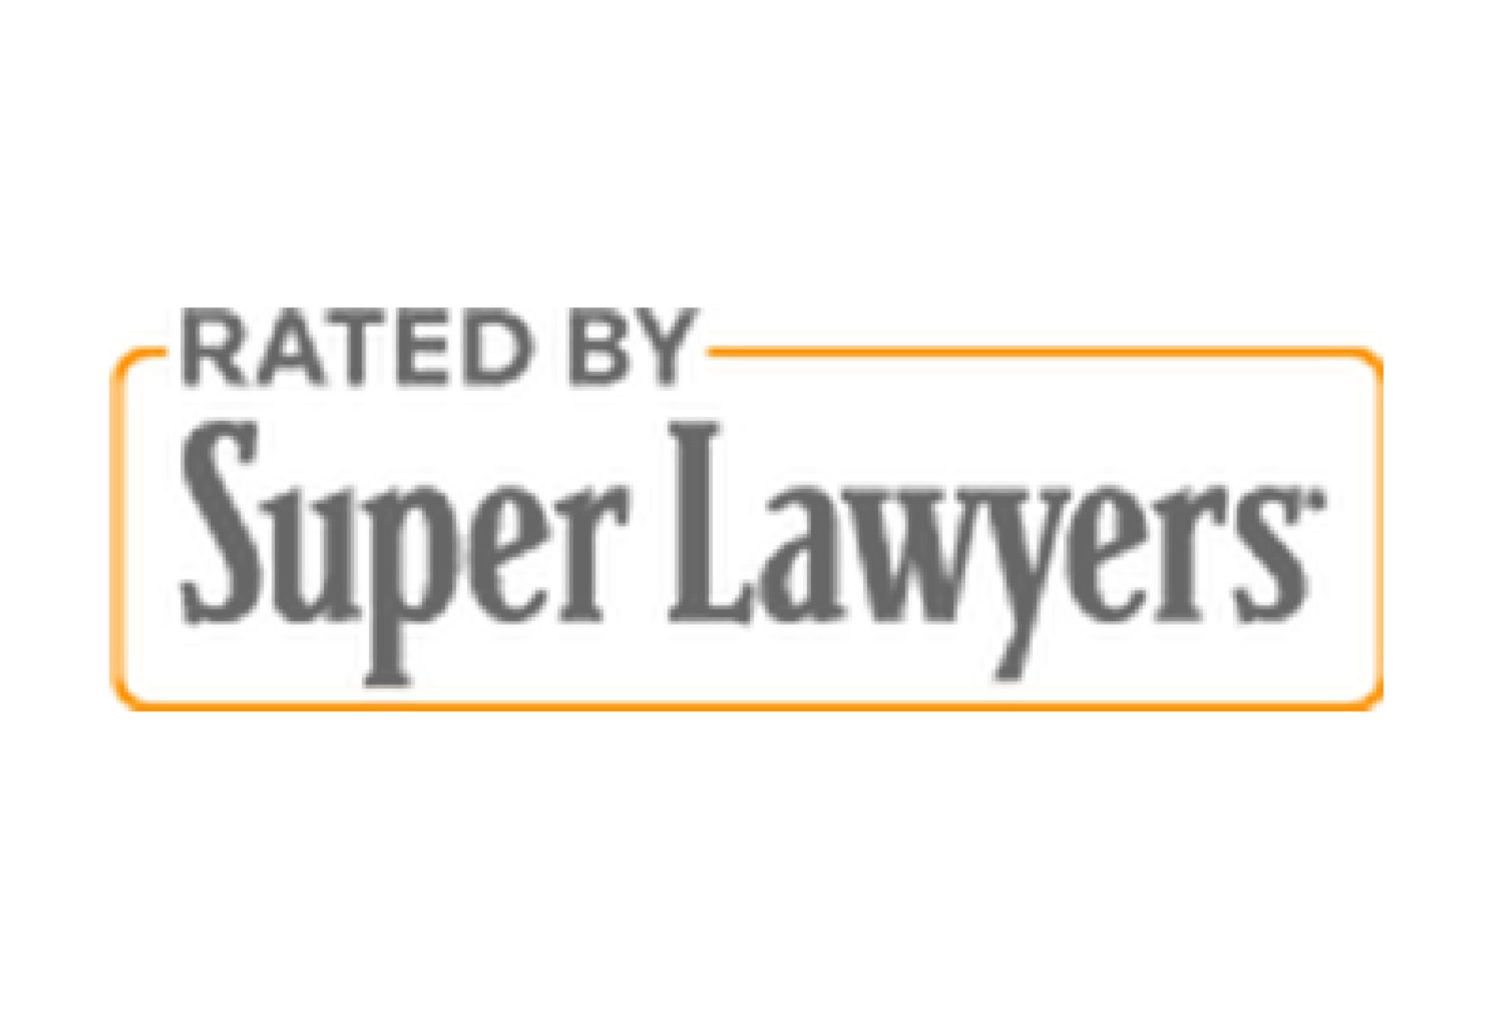 New York Metro Super Lawyers Recognizes HG Attorneys as “Rising Stars” in 2019